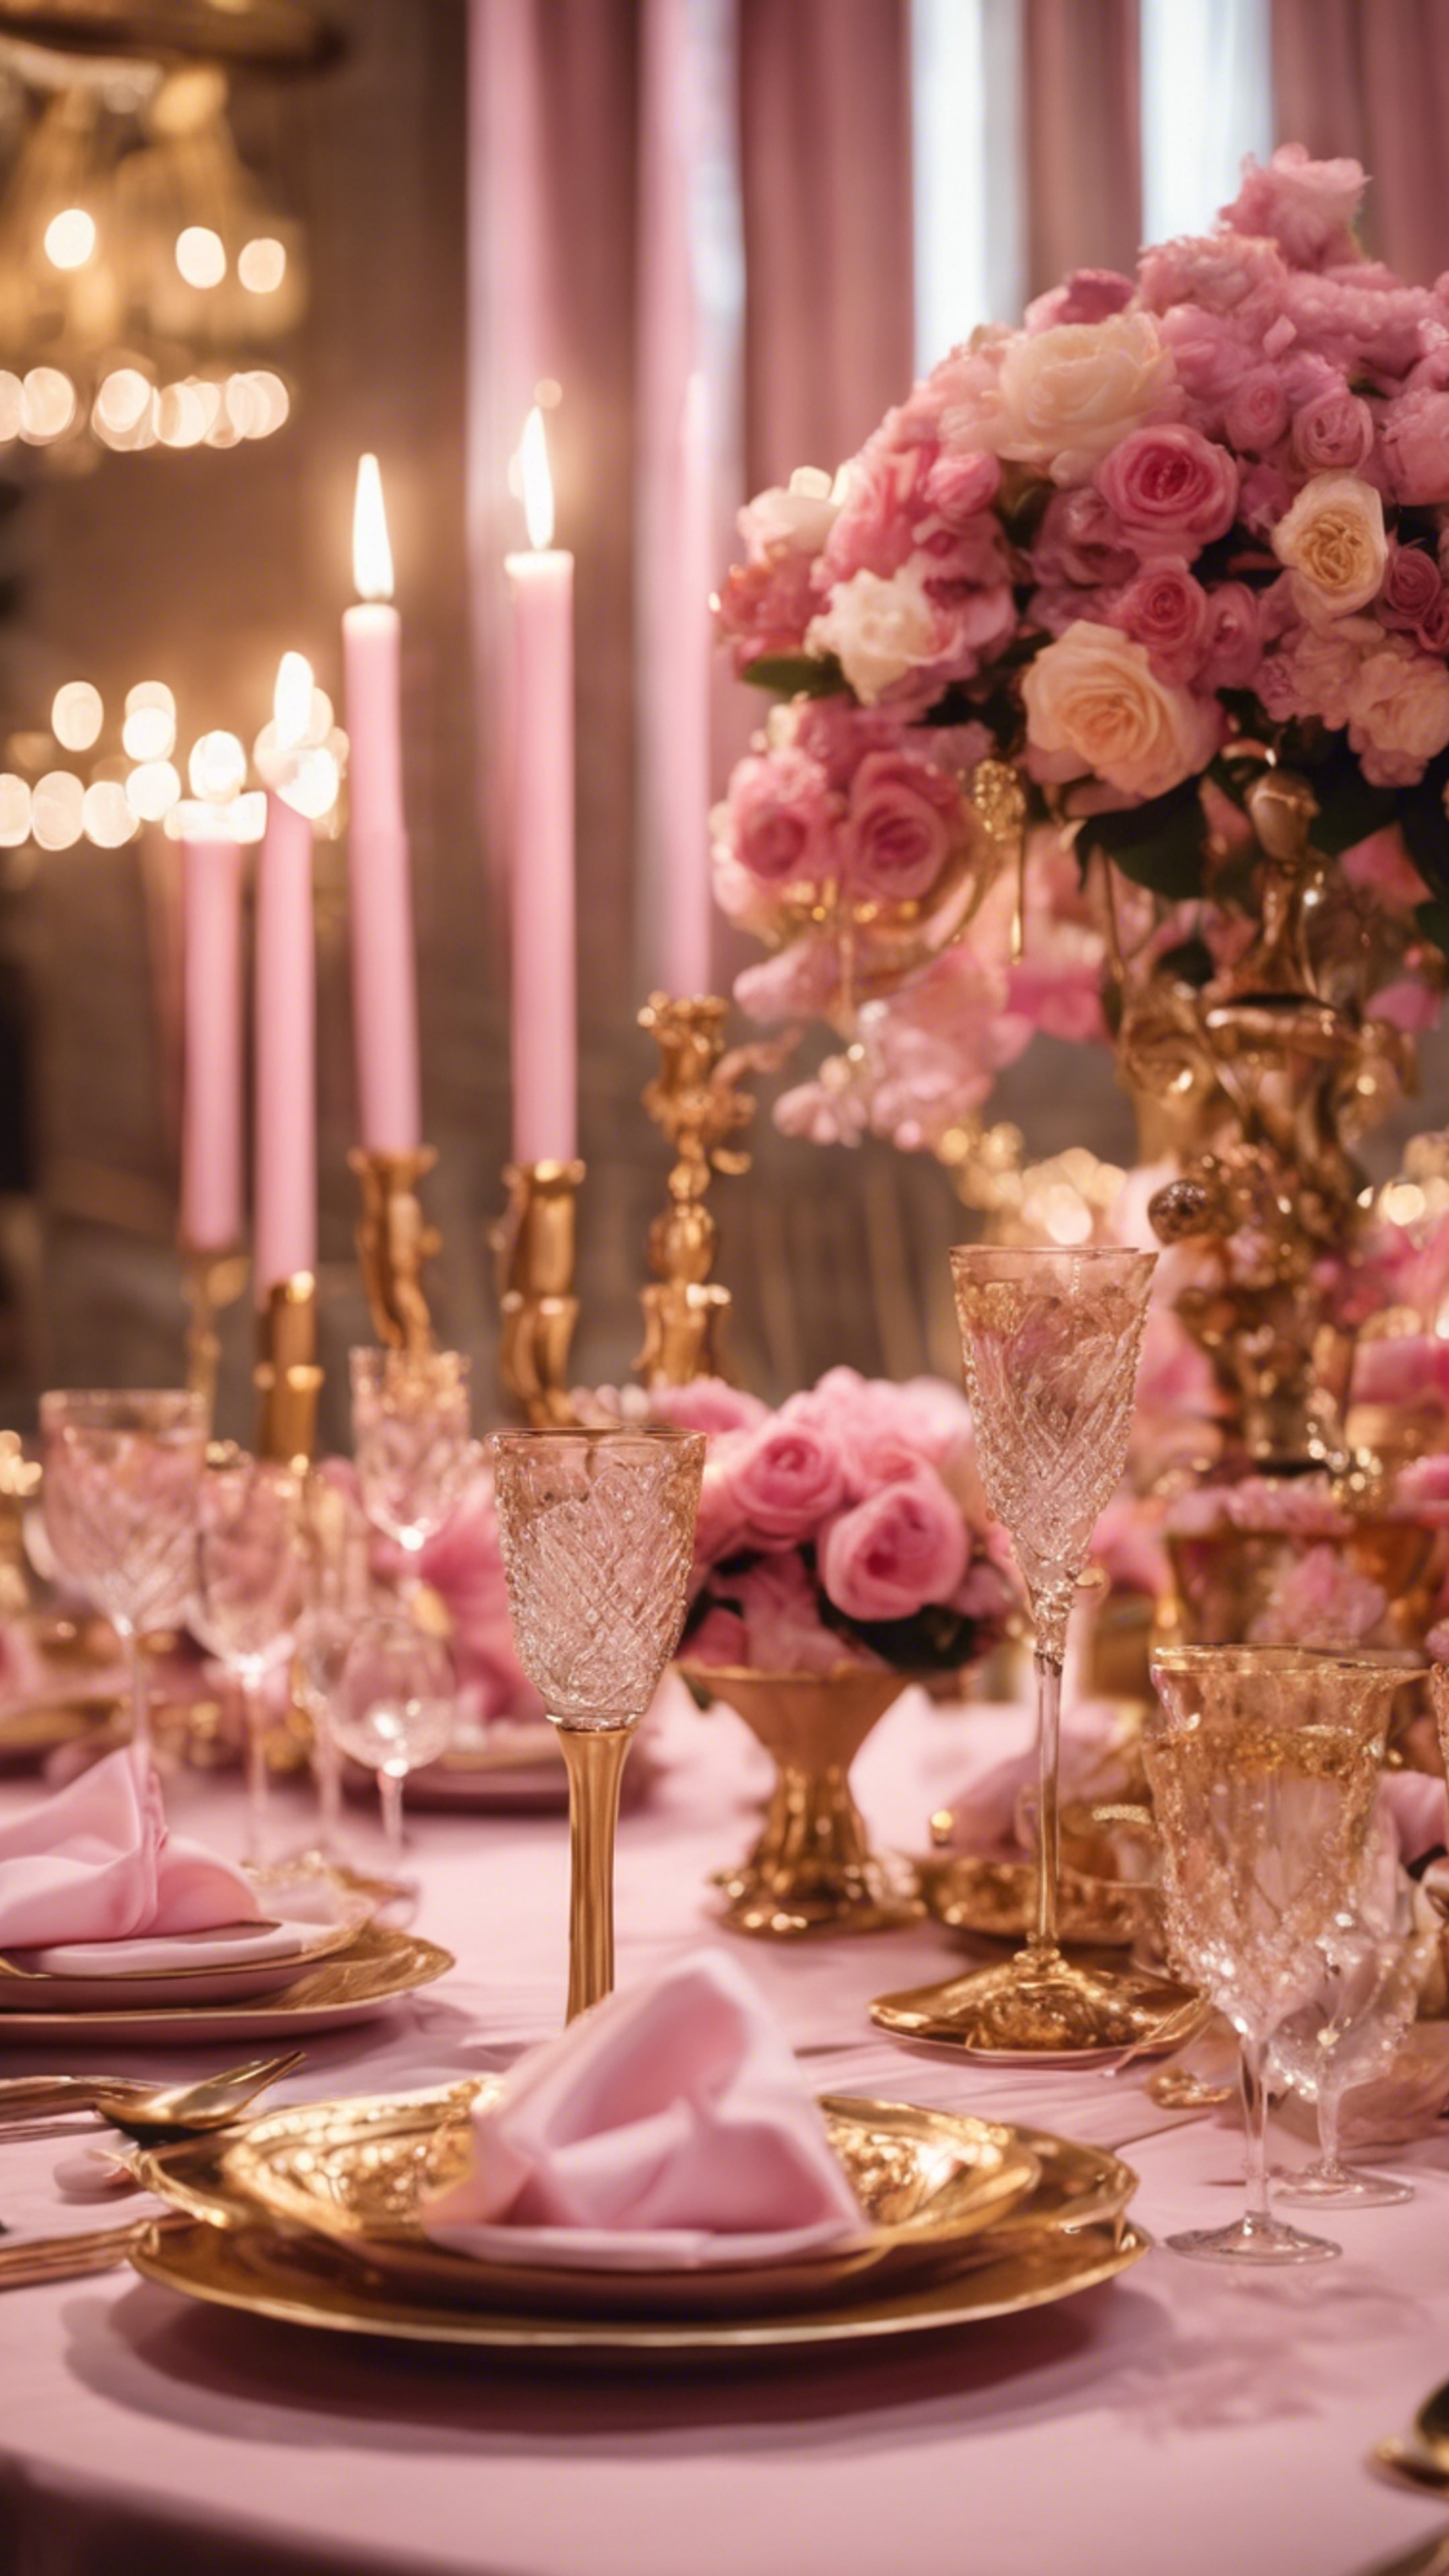 An elegant pink and gold-themed dining table set for an evening soiree. Tapeta[a96f4c3be44f41948a30]